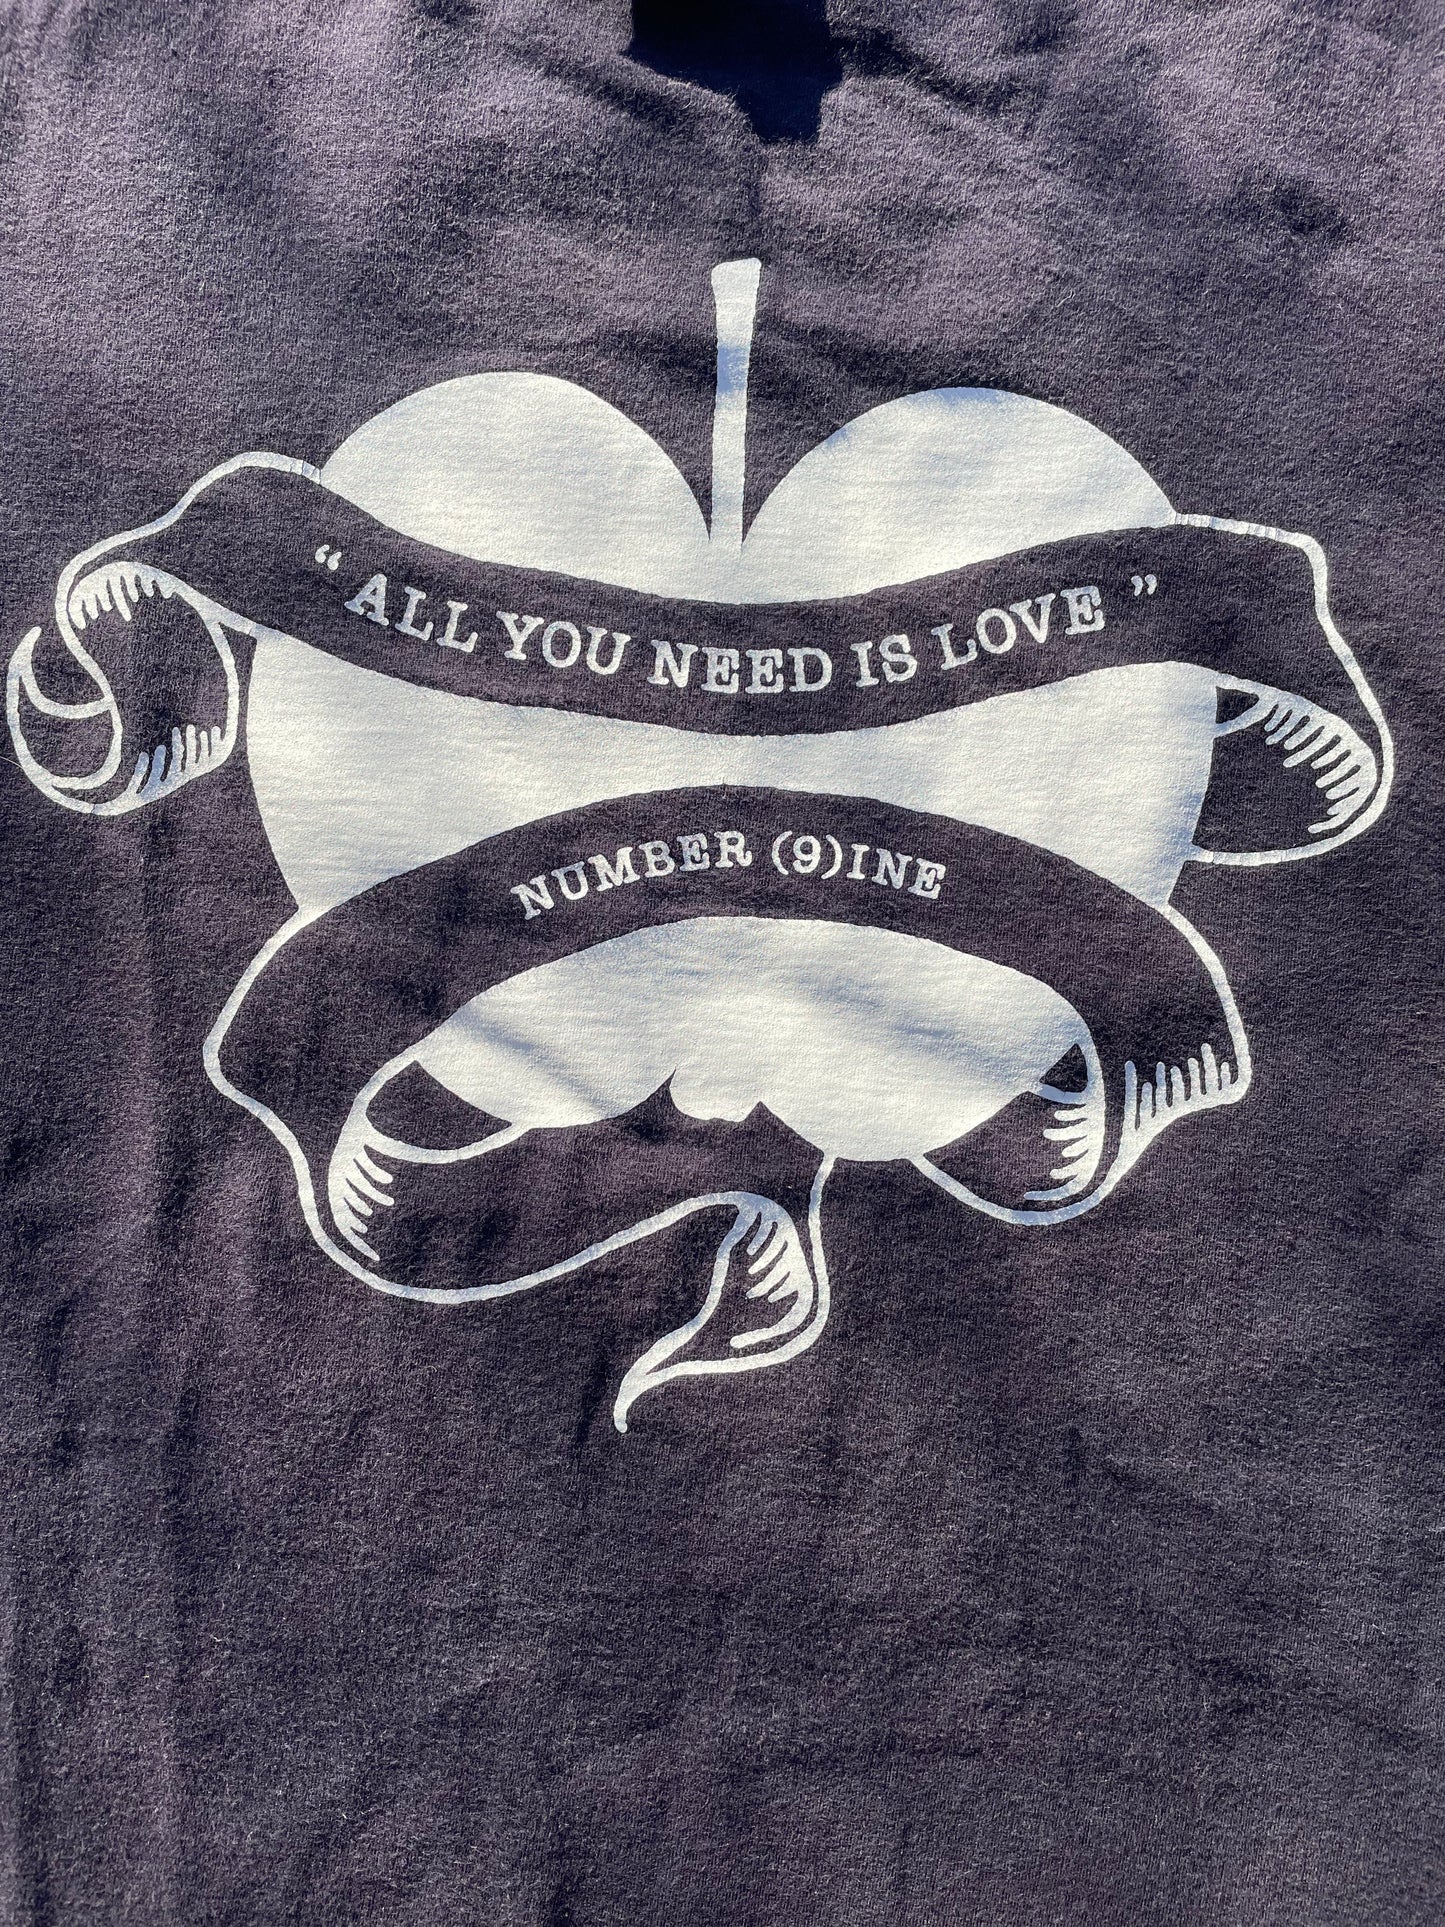 Number (N)ine “All You Need Is Love” T-Shirt